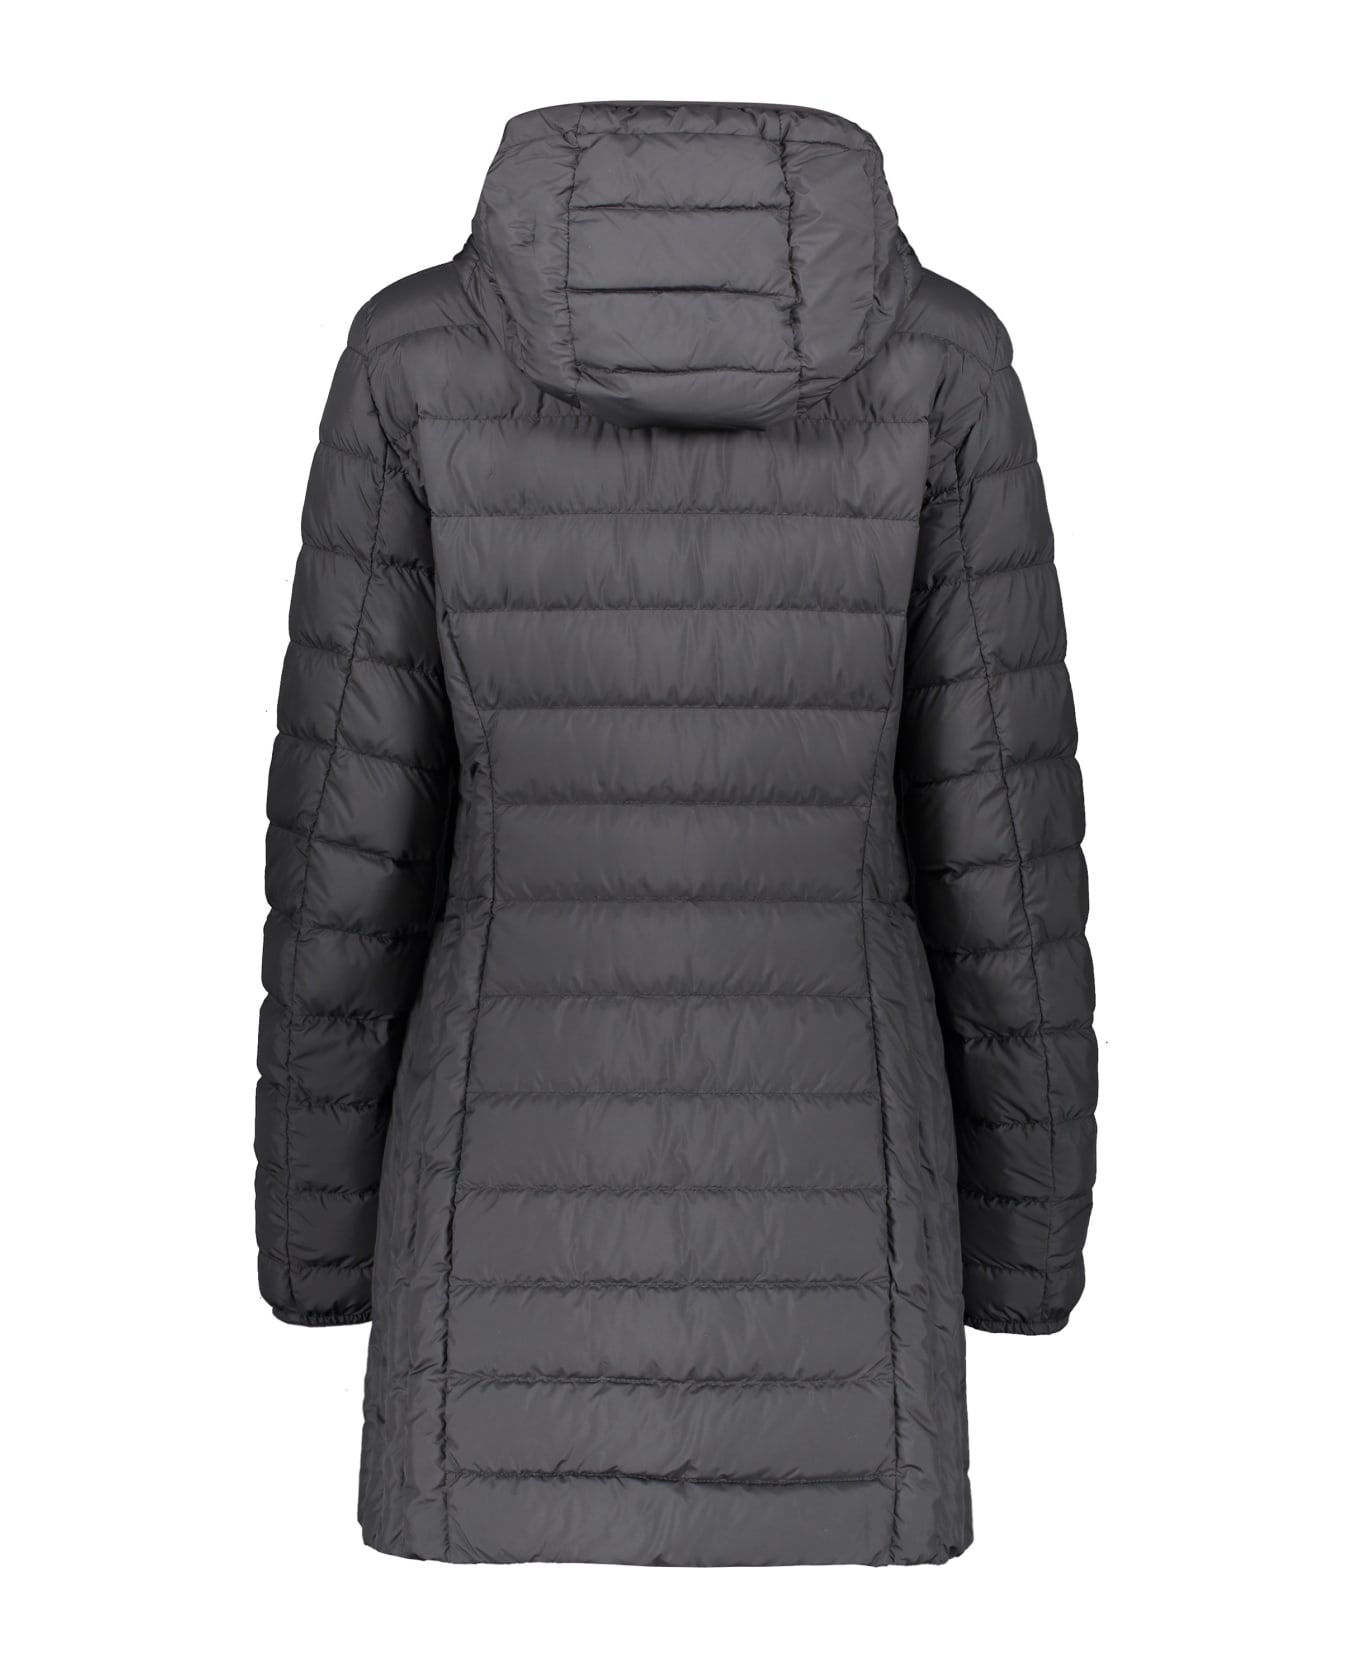 Parajumpers Irene Hooded Down Jacket - black コート